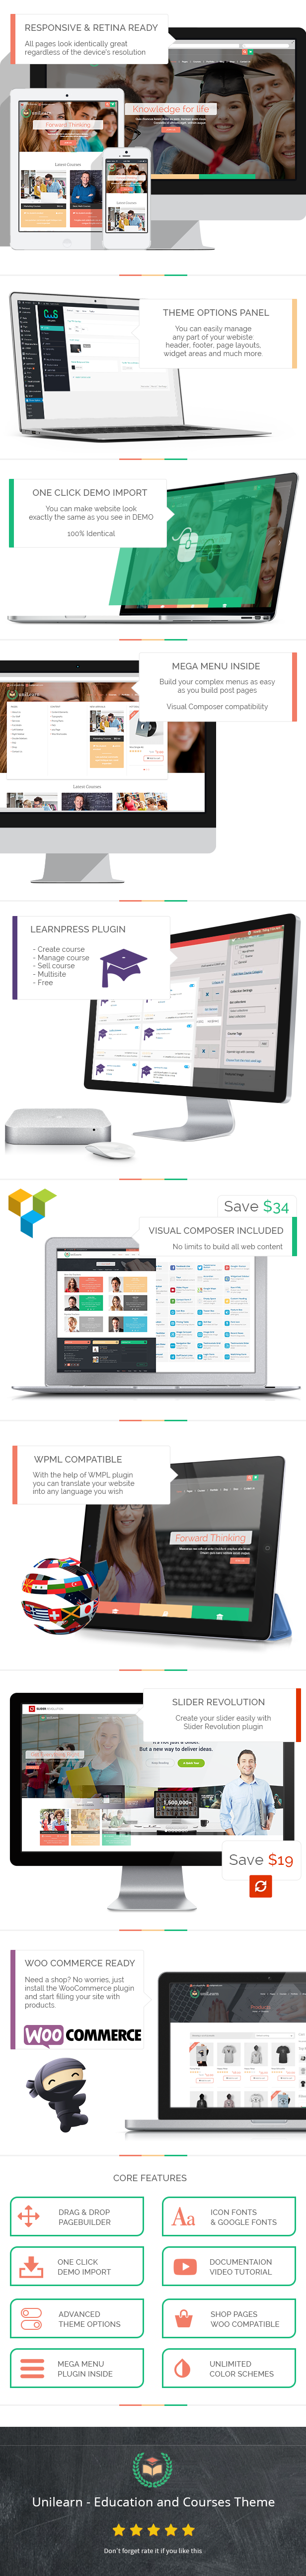 UniLearn - Education and Courses WordPress Theme